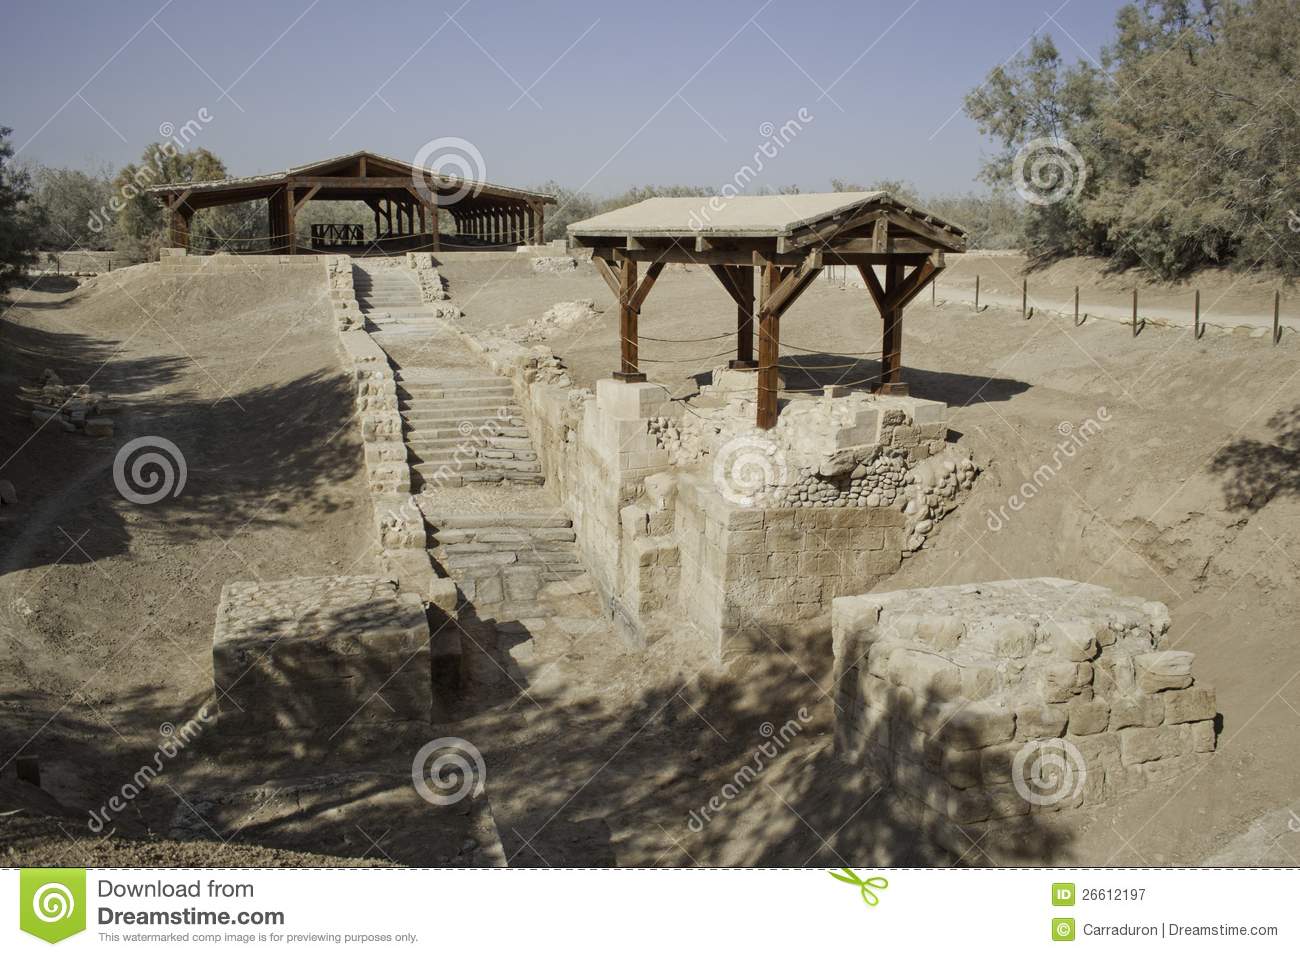 Baptism Site In Jordan River Royalty Free Stock Photography   Image